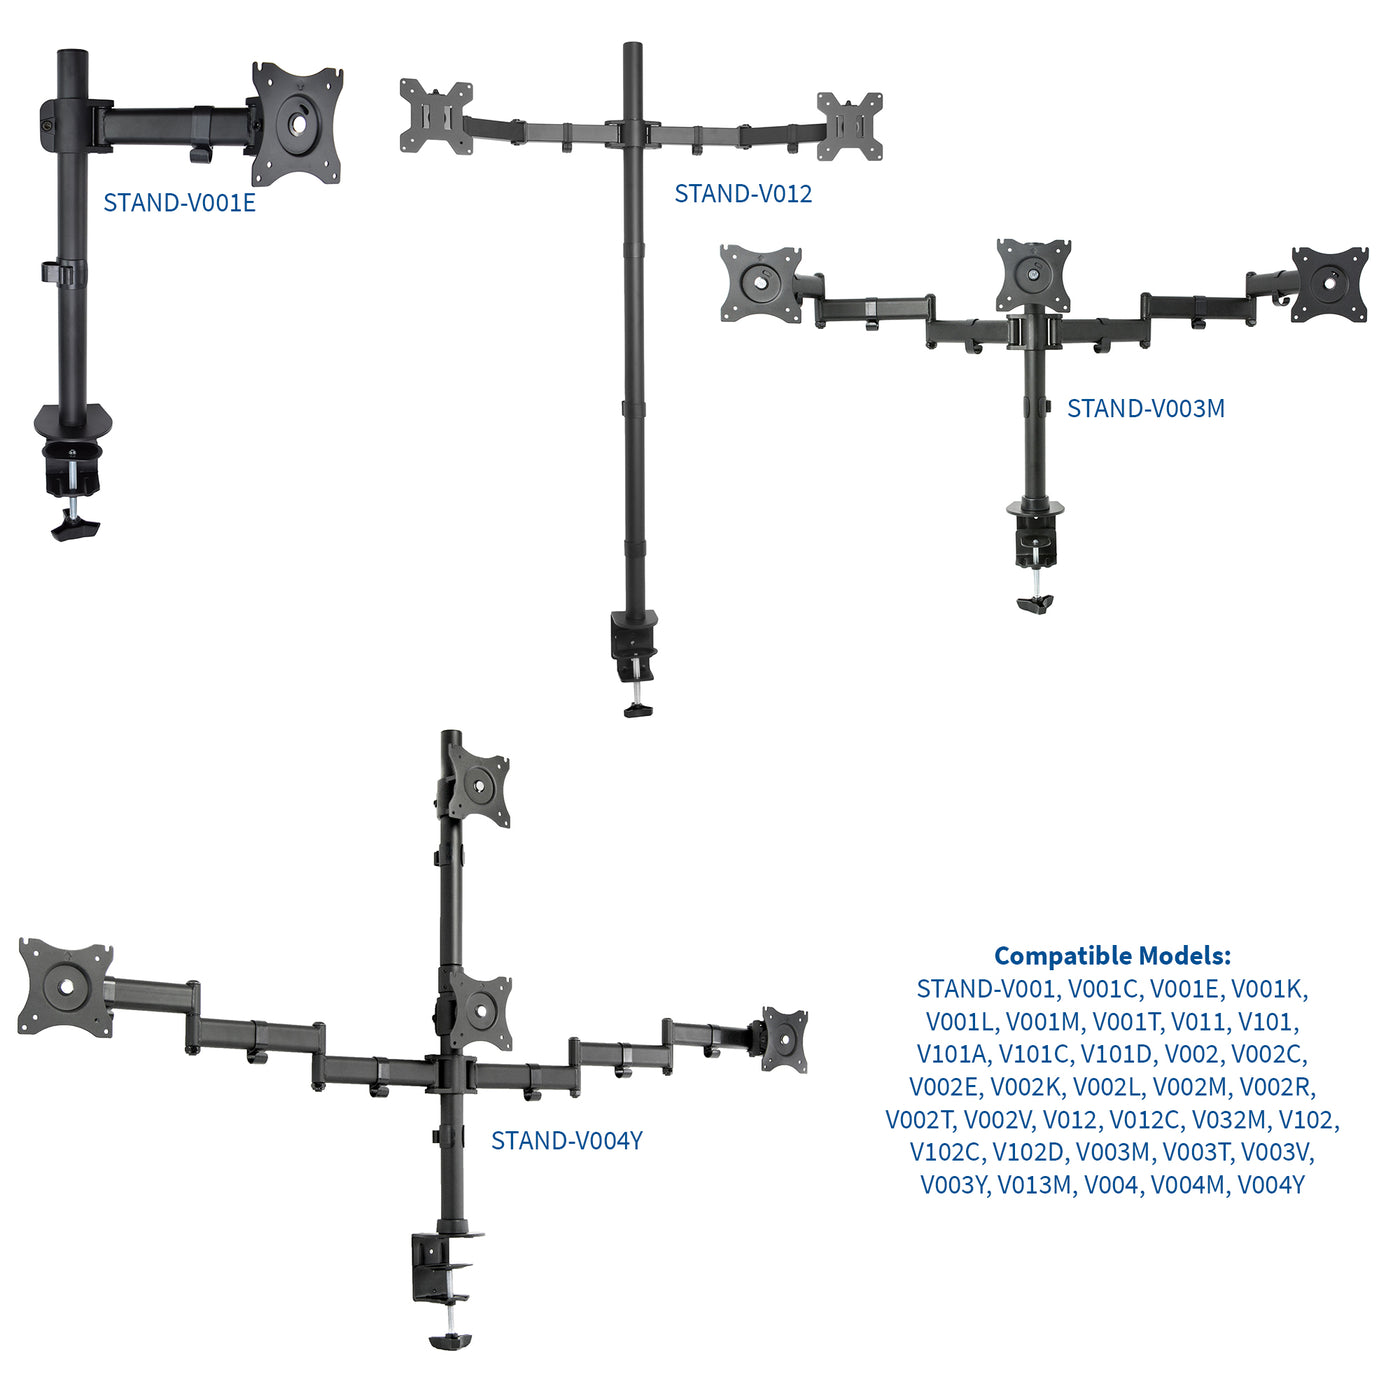 Single monitor arm for a variety of desk stands from VIVO.